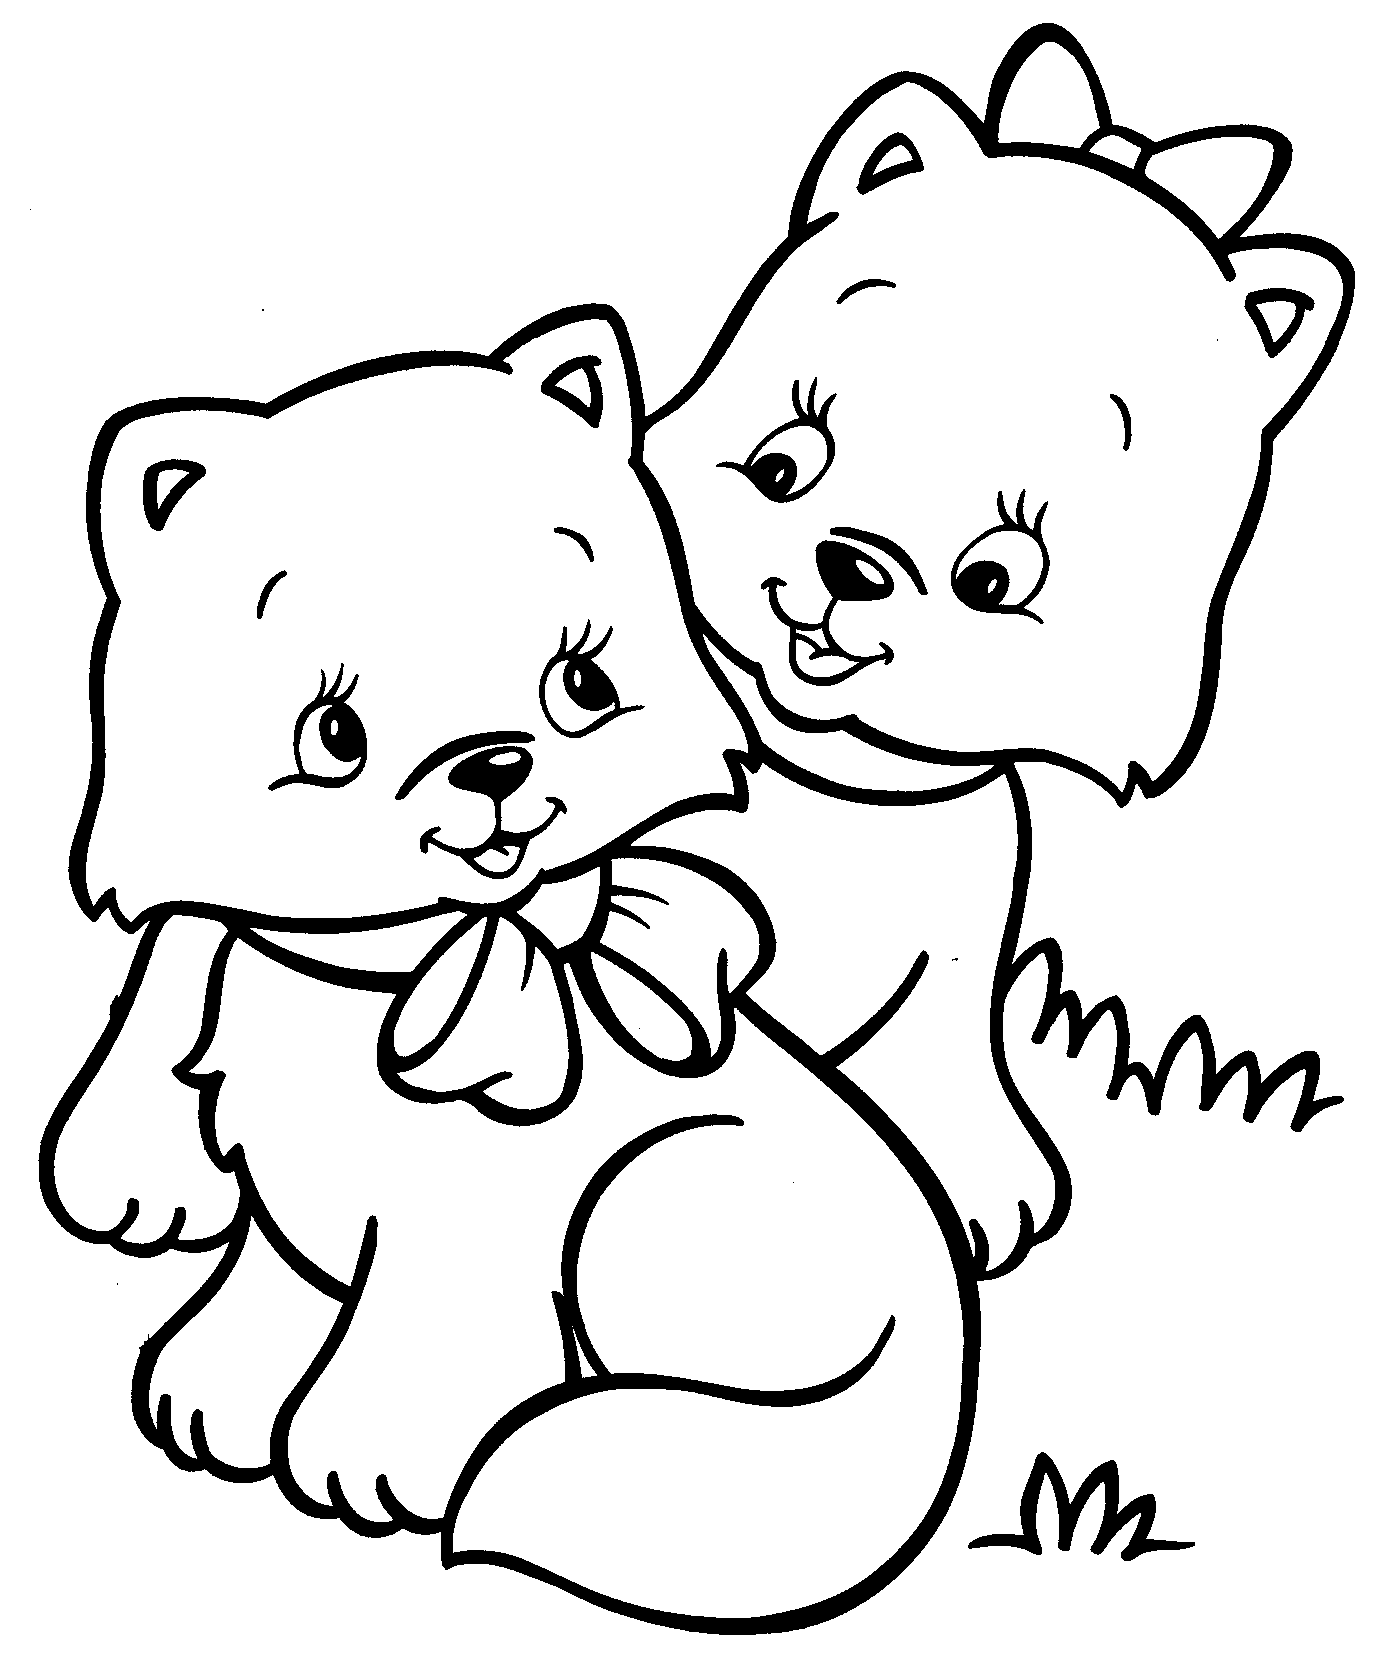 Two Cat Funny Coloring Pages For Kids #bb8 : Printable Cats ...